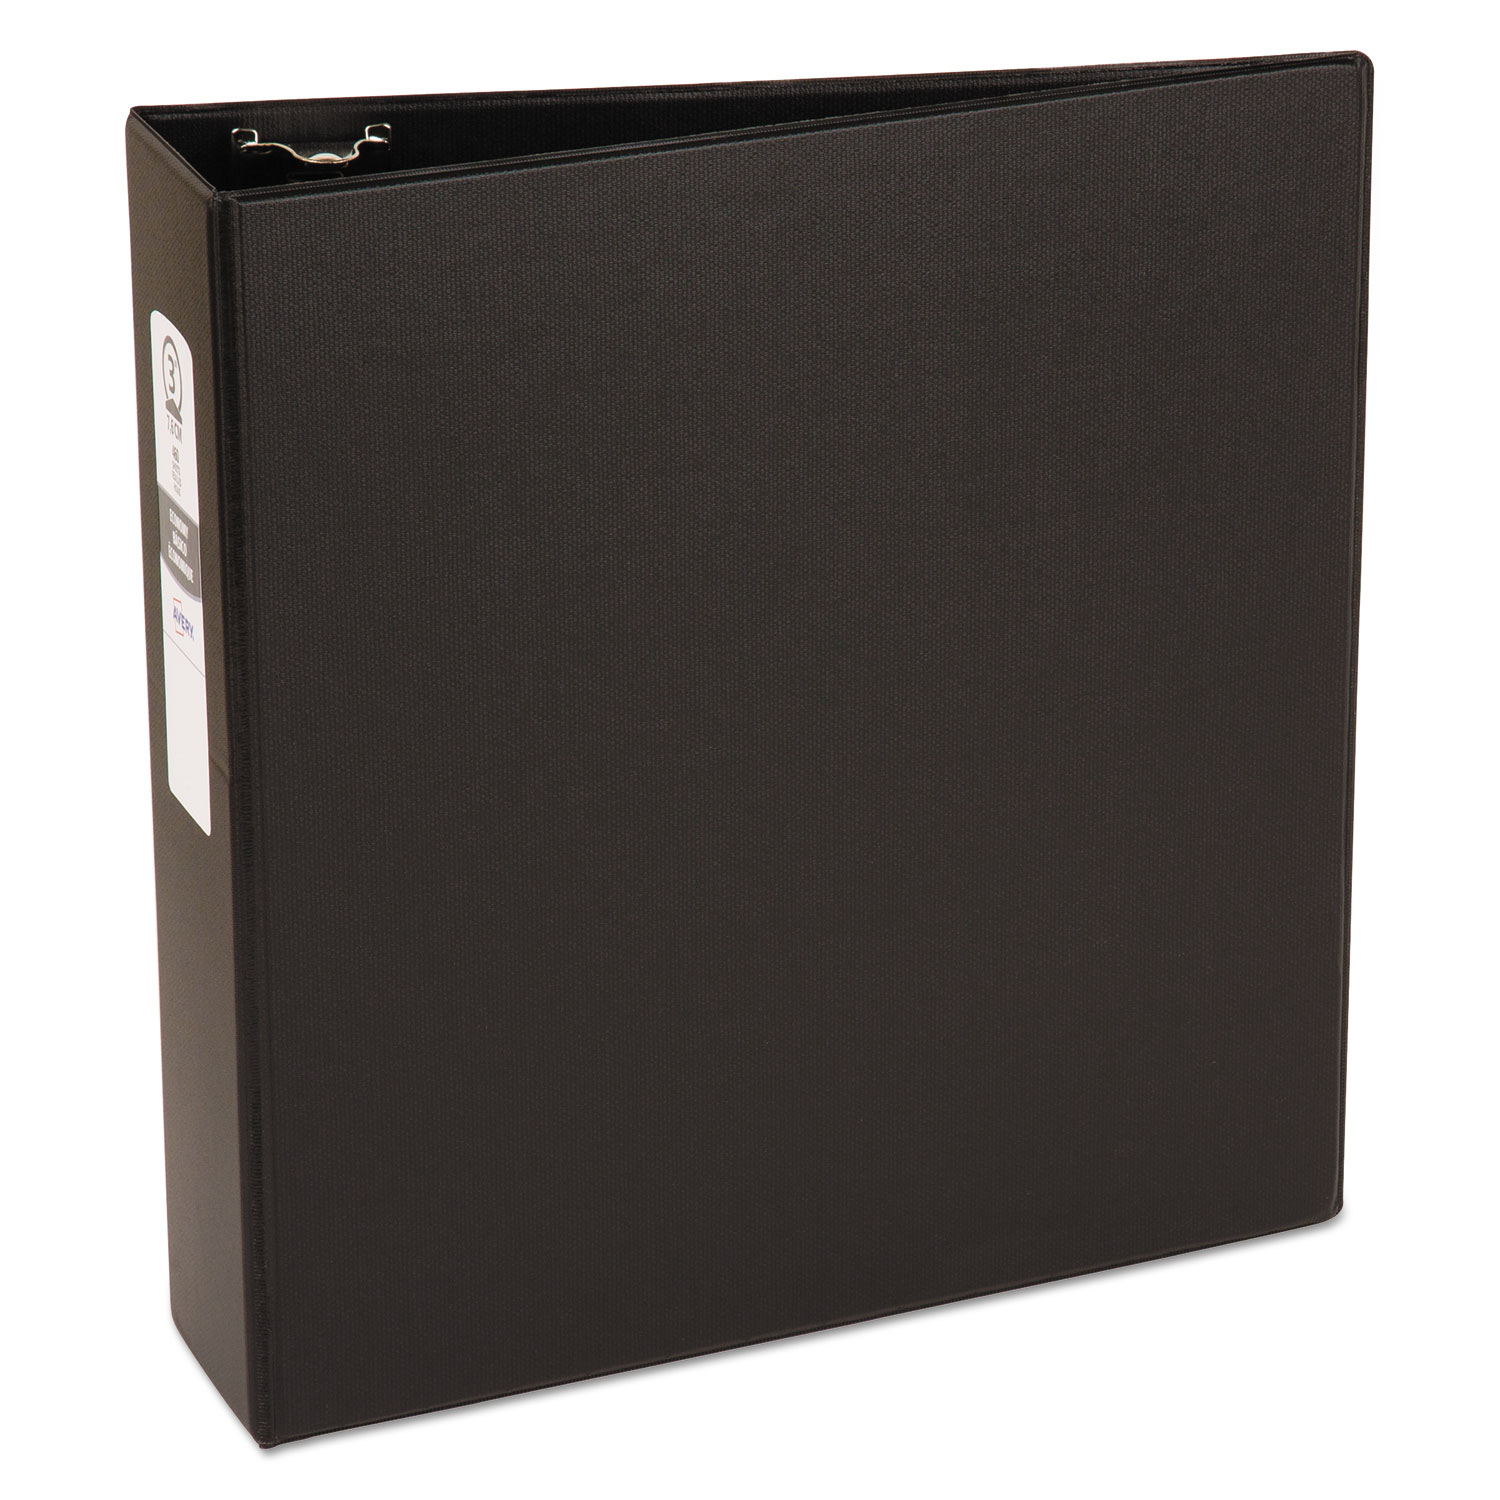  Avery 03602 Economy Non-View Binder with Round Rings, 3 Rings, 3 Capacity, 11 x 8.5, Black (AVE03602) 